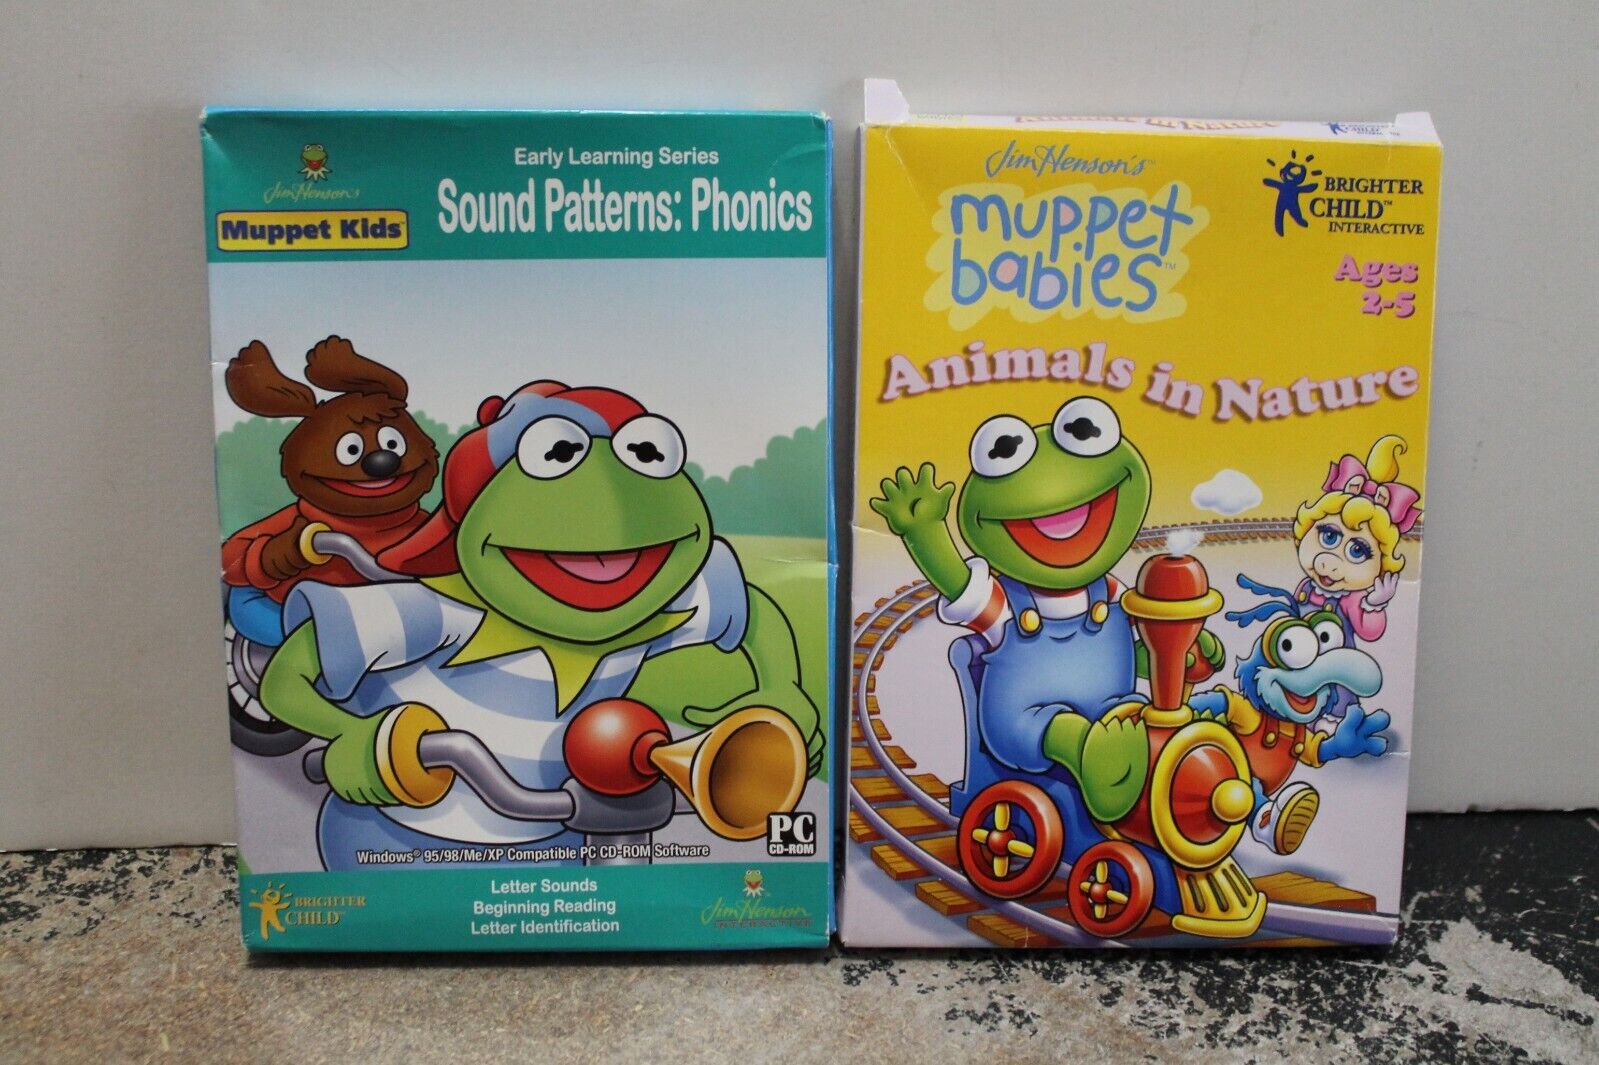 MUPPET BABIES PC/CD-Rom games--Animals in Nature; Sound Patterns: Phonics